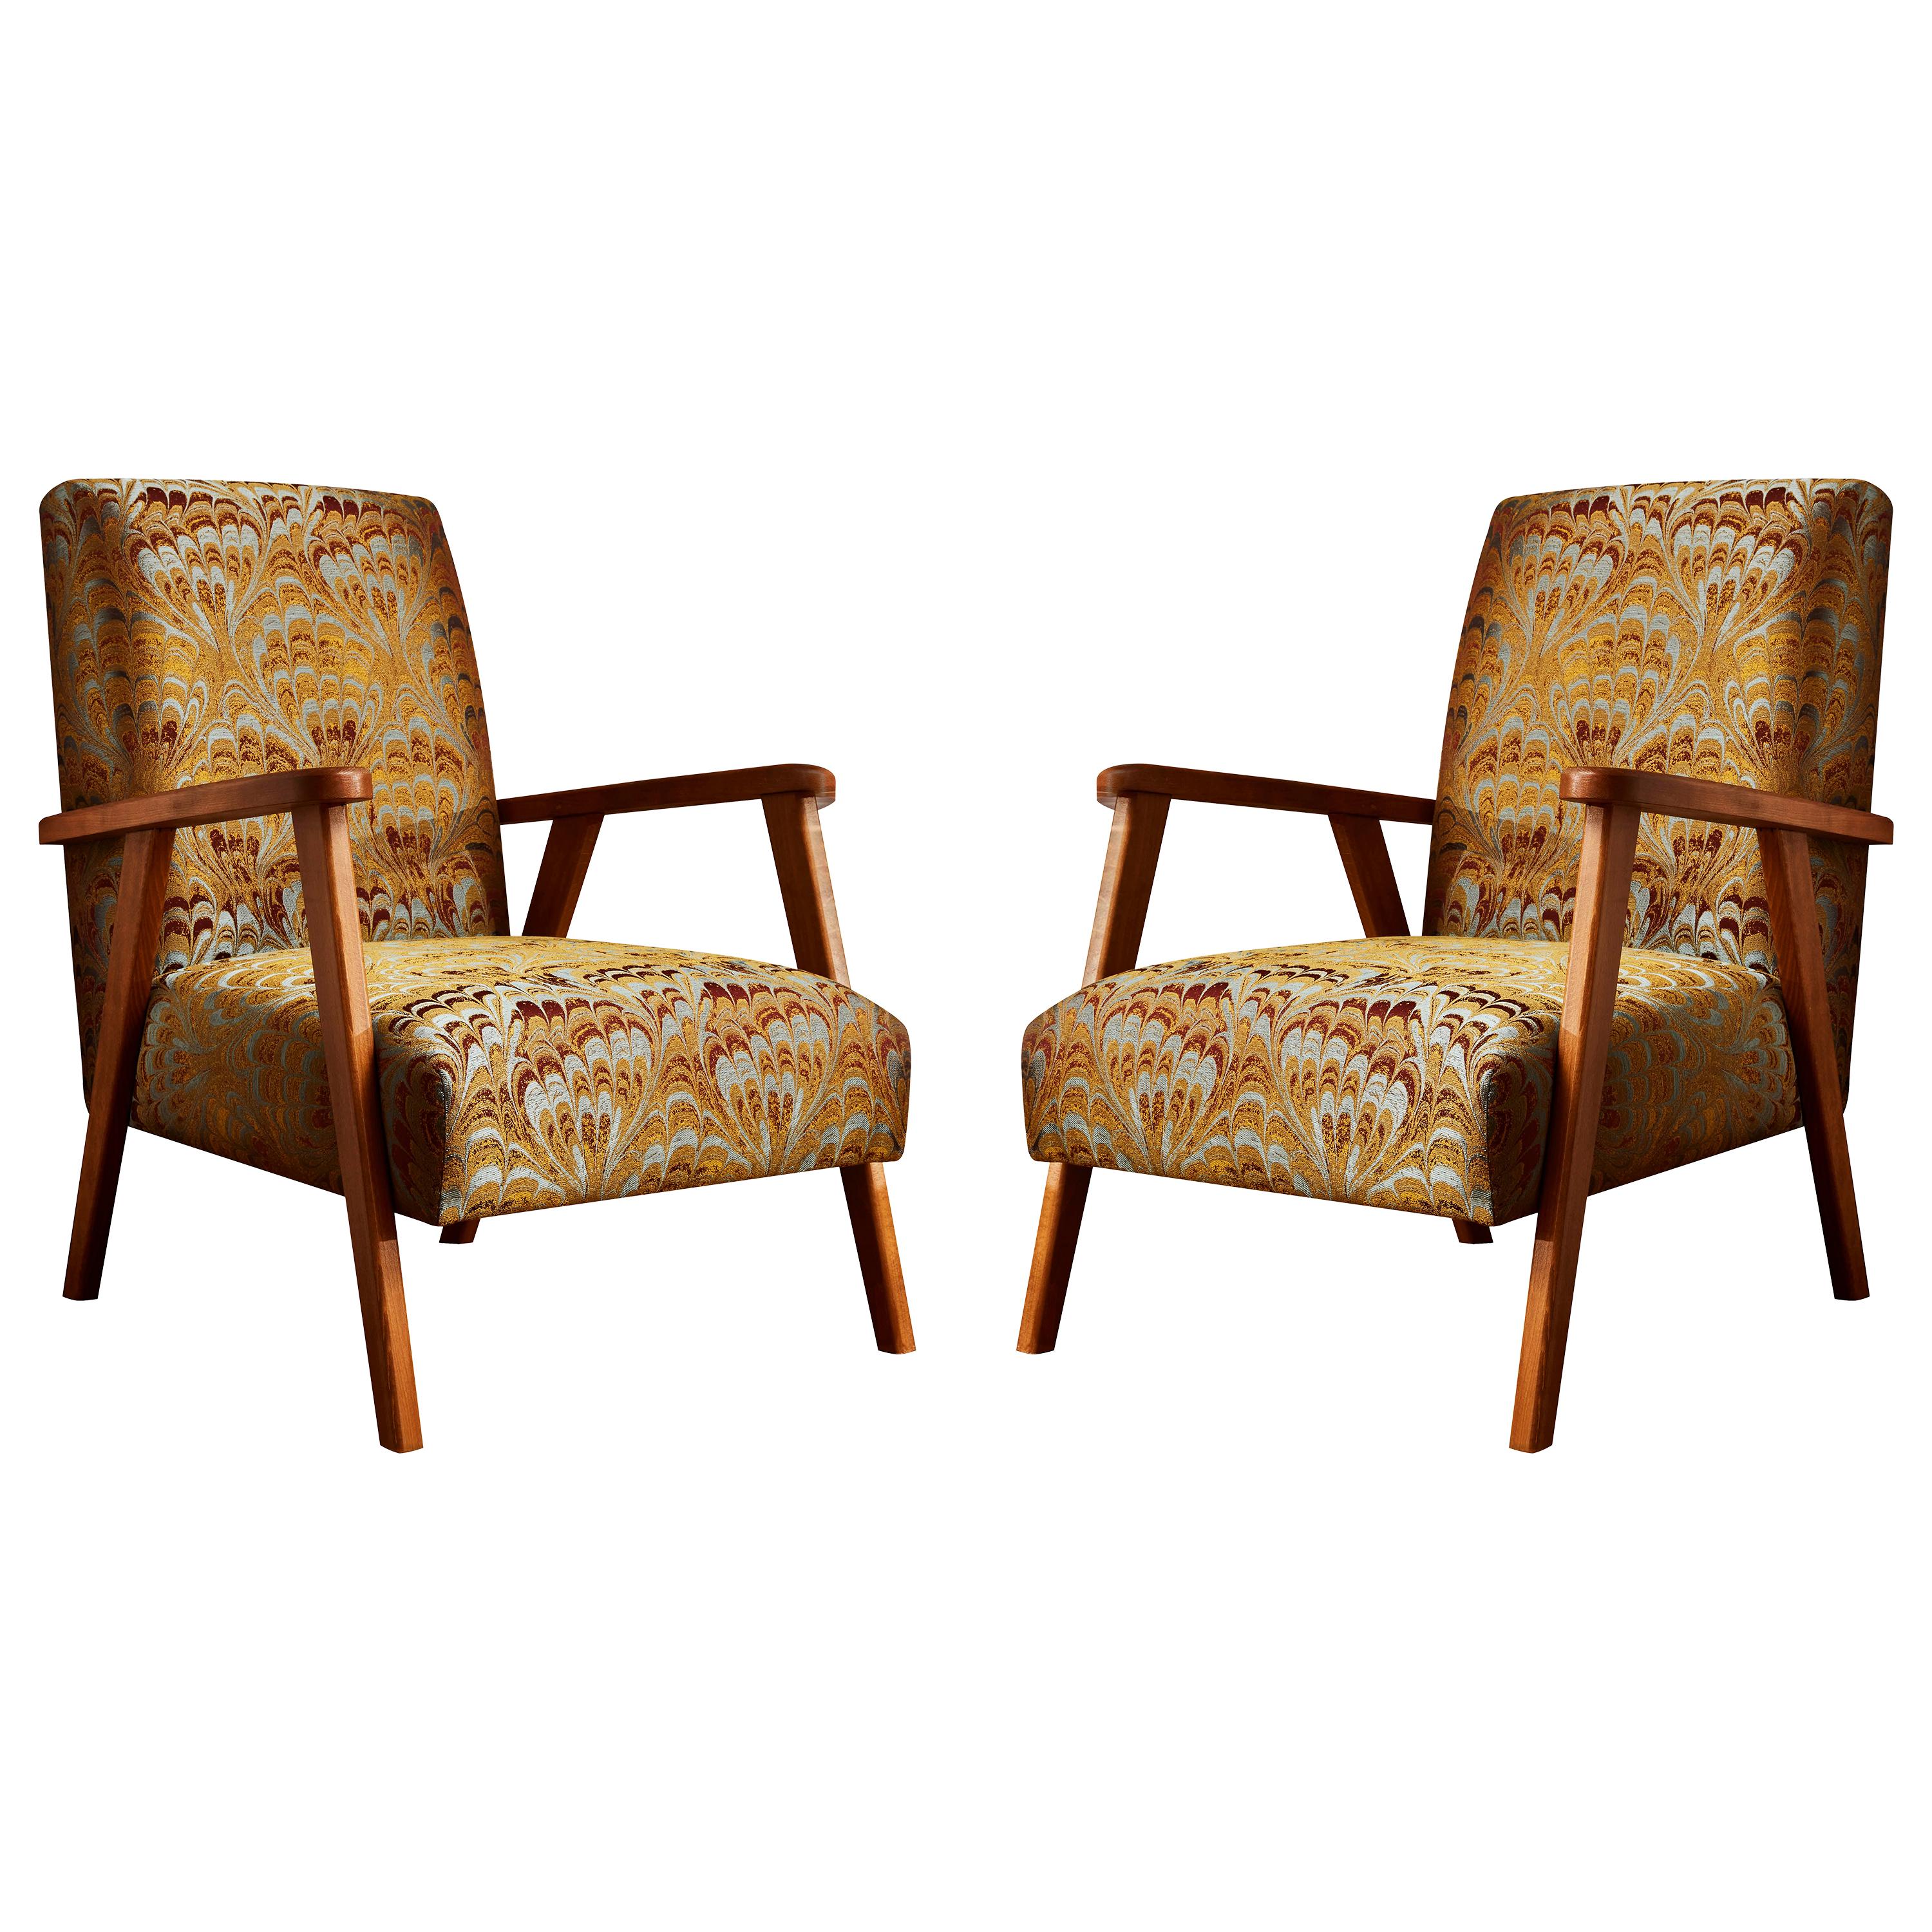 Pair of Vintage Armchairs at cost price.